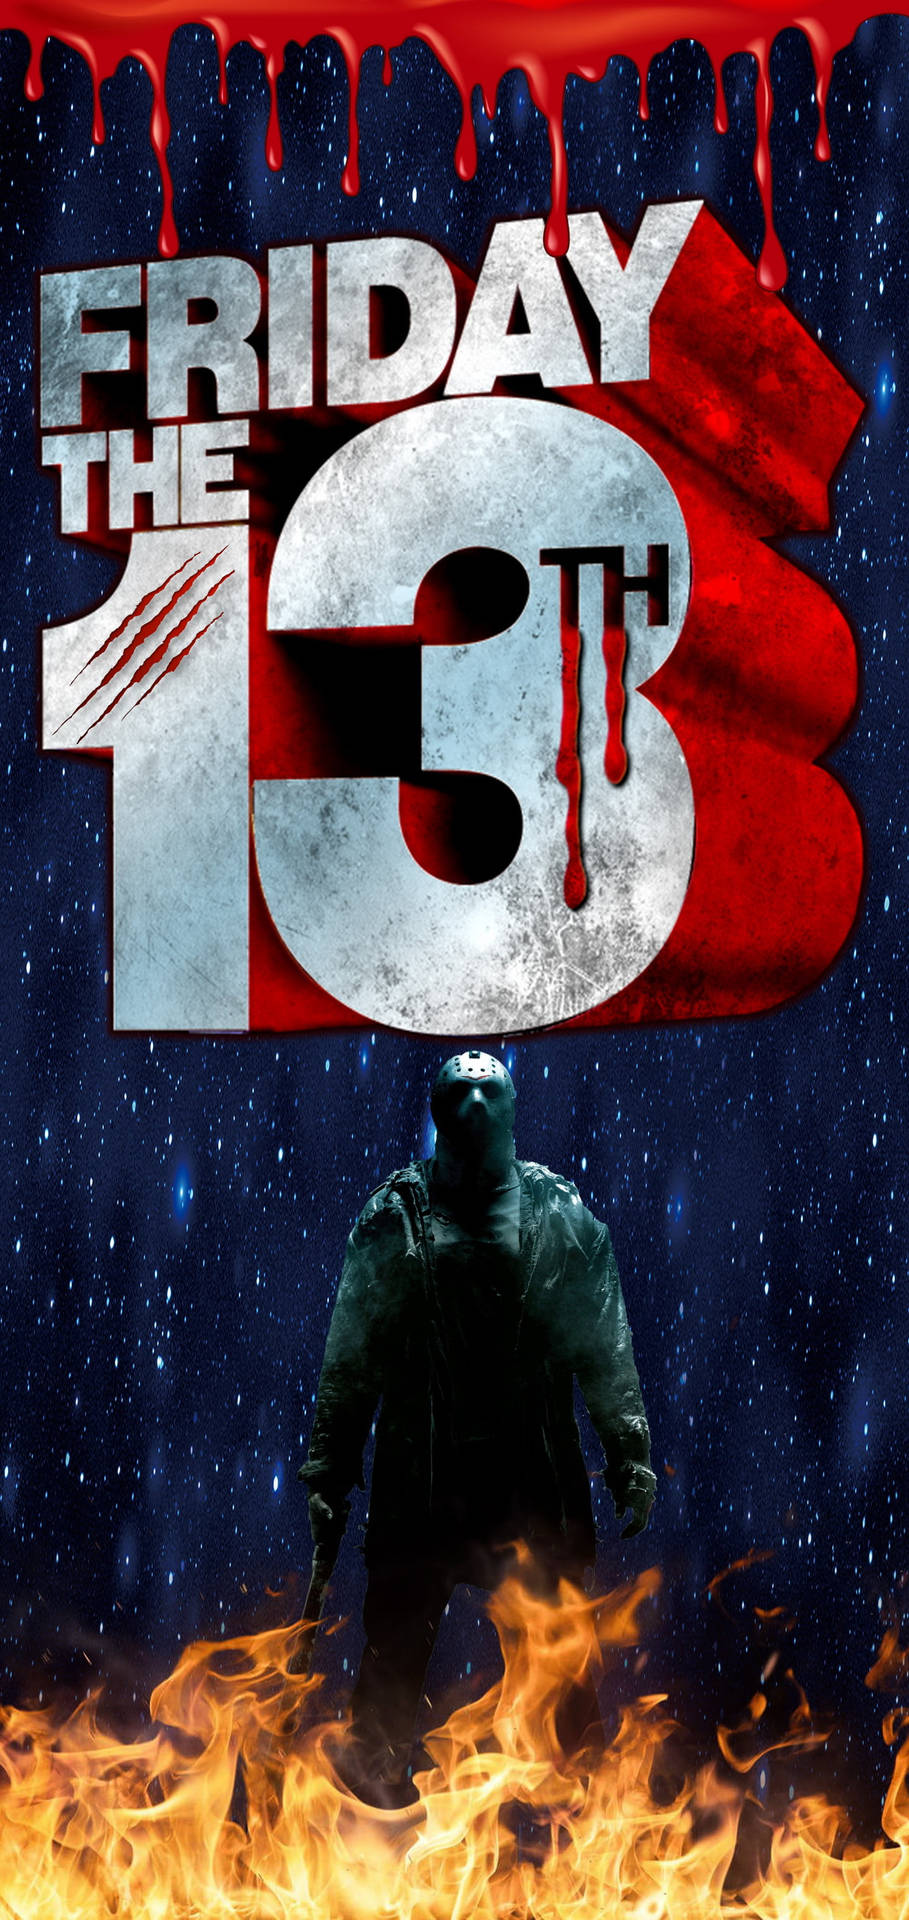 Bloody Friday The 13th Movie Poster Background